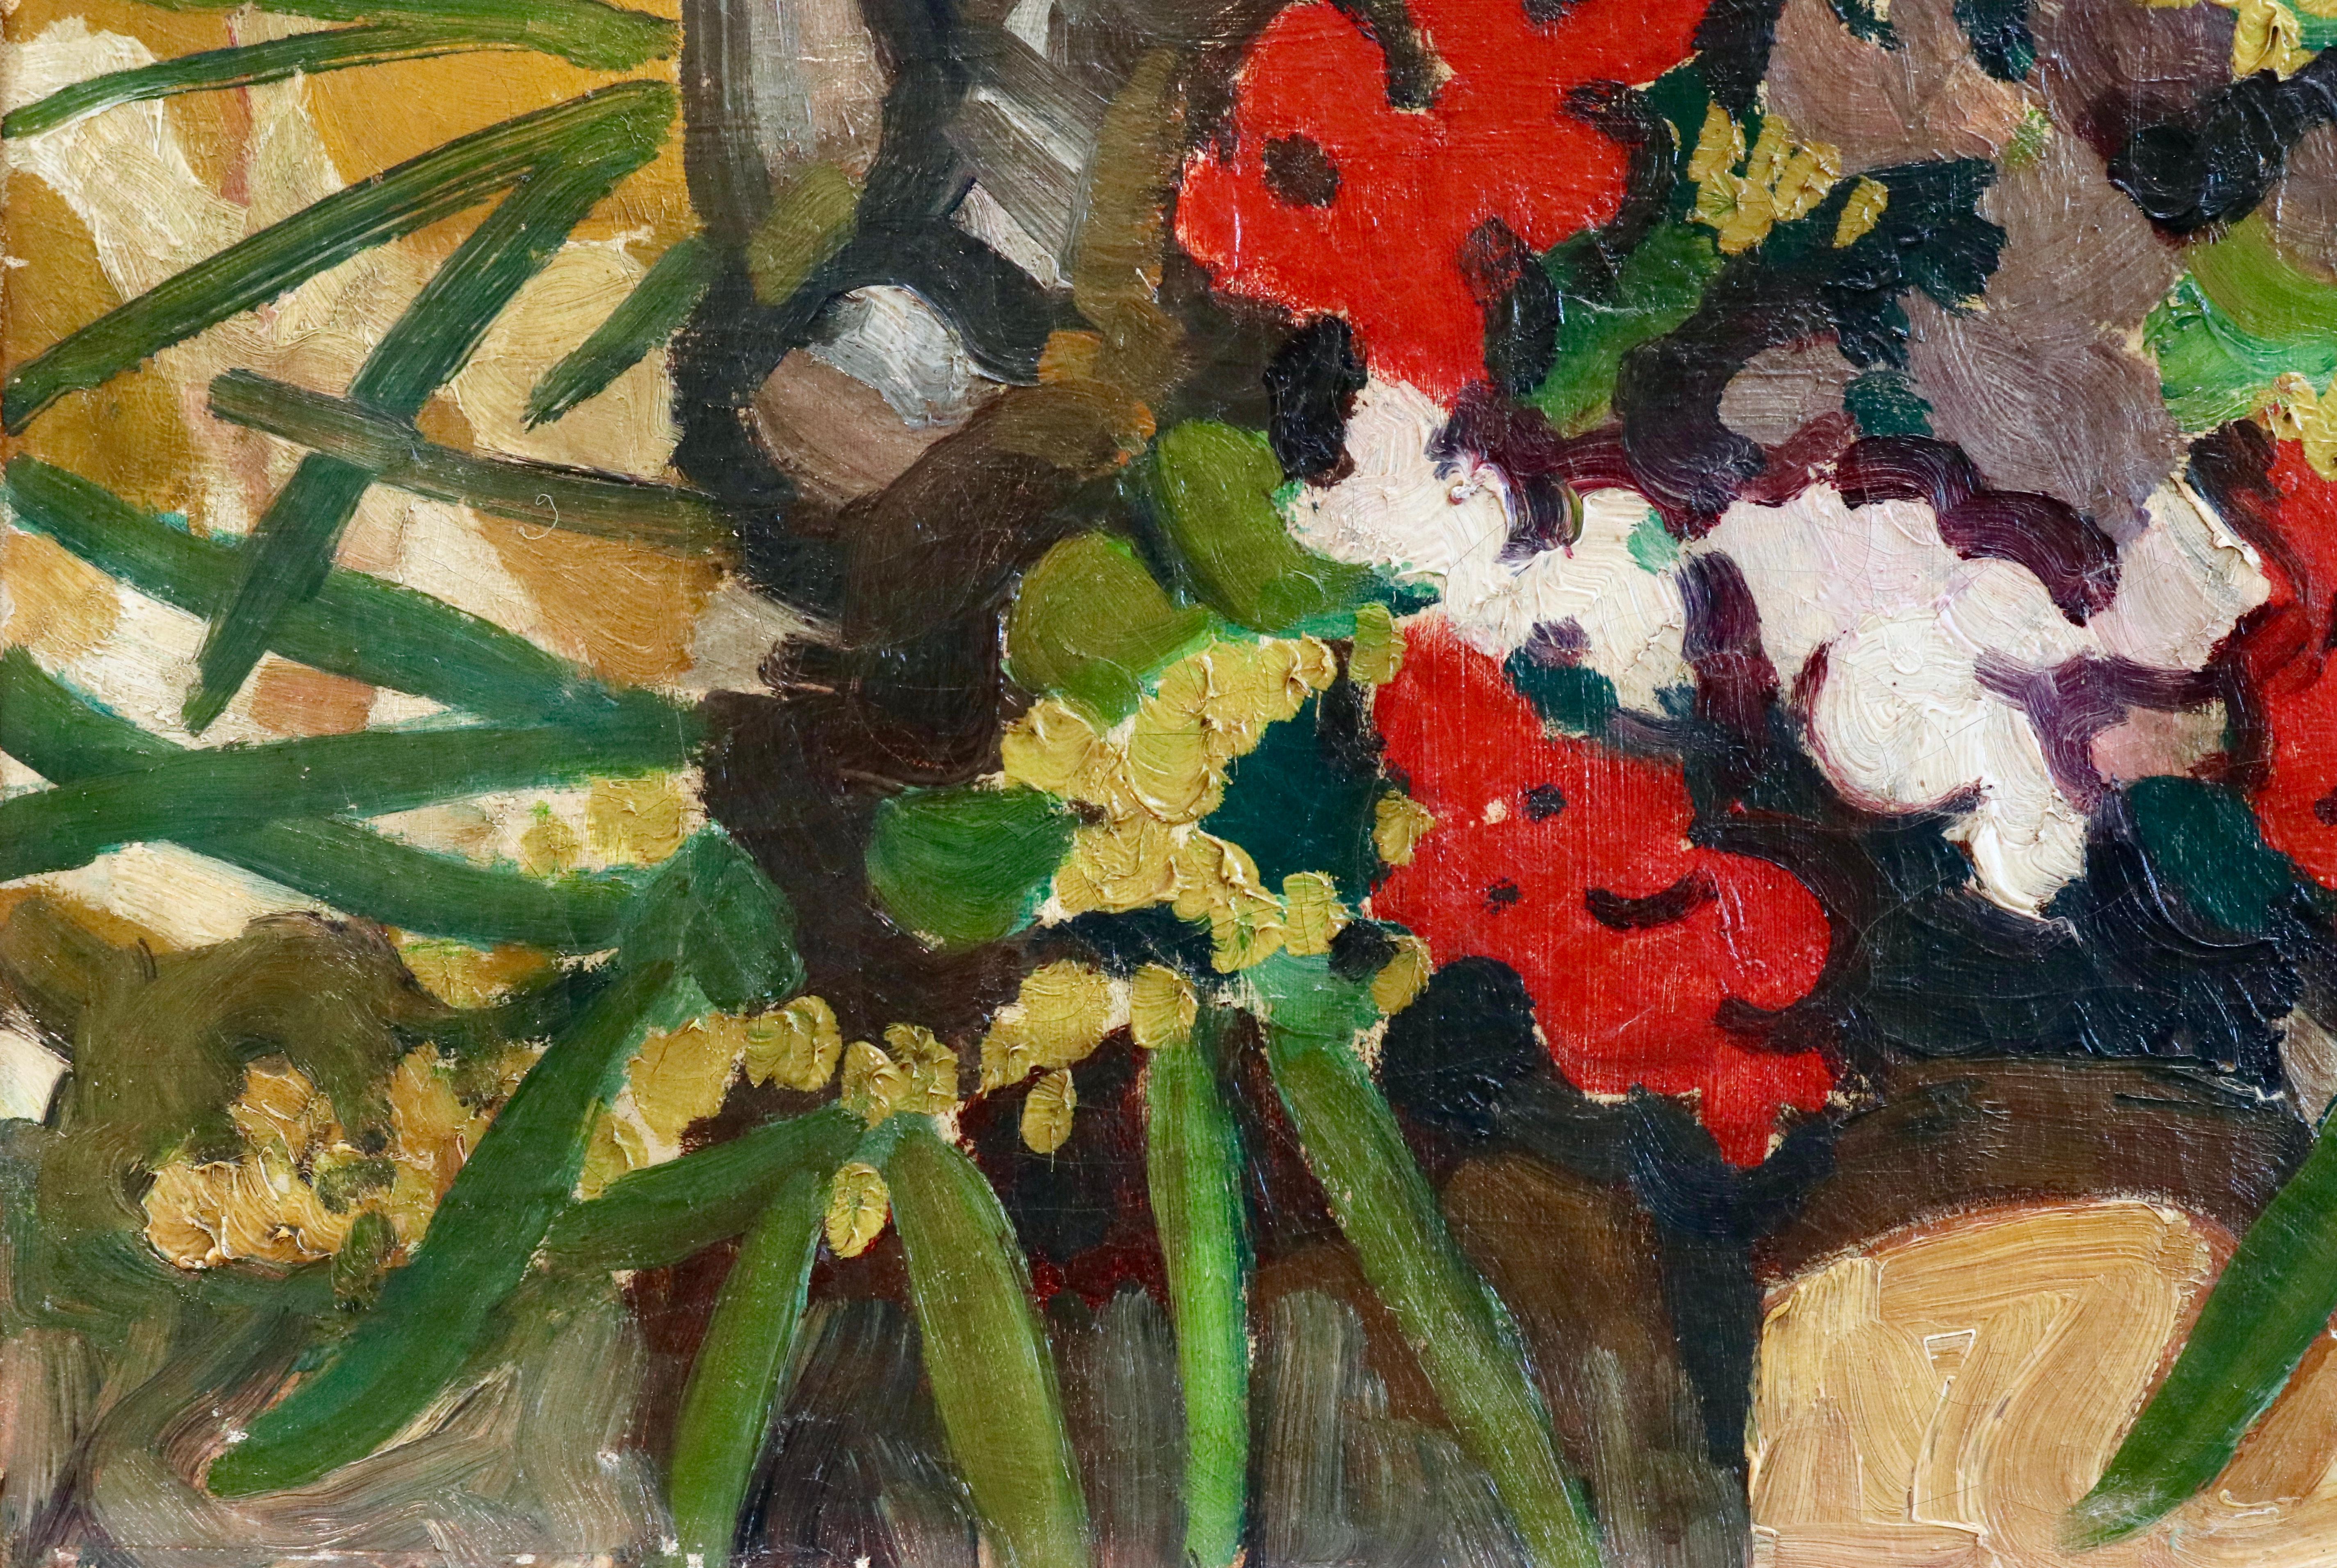 Oil on canvas circa 1910 by Louis Valtat depicting a still life of flowers and a statue. This painting is not currently framed but a suitable frame can be sourced if required.

Louis Valtat was a French painter and printmaker associated with the